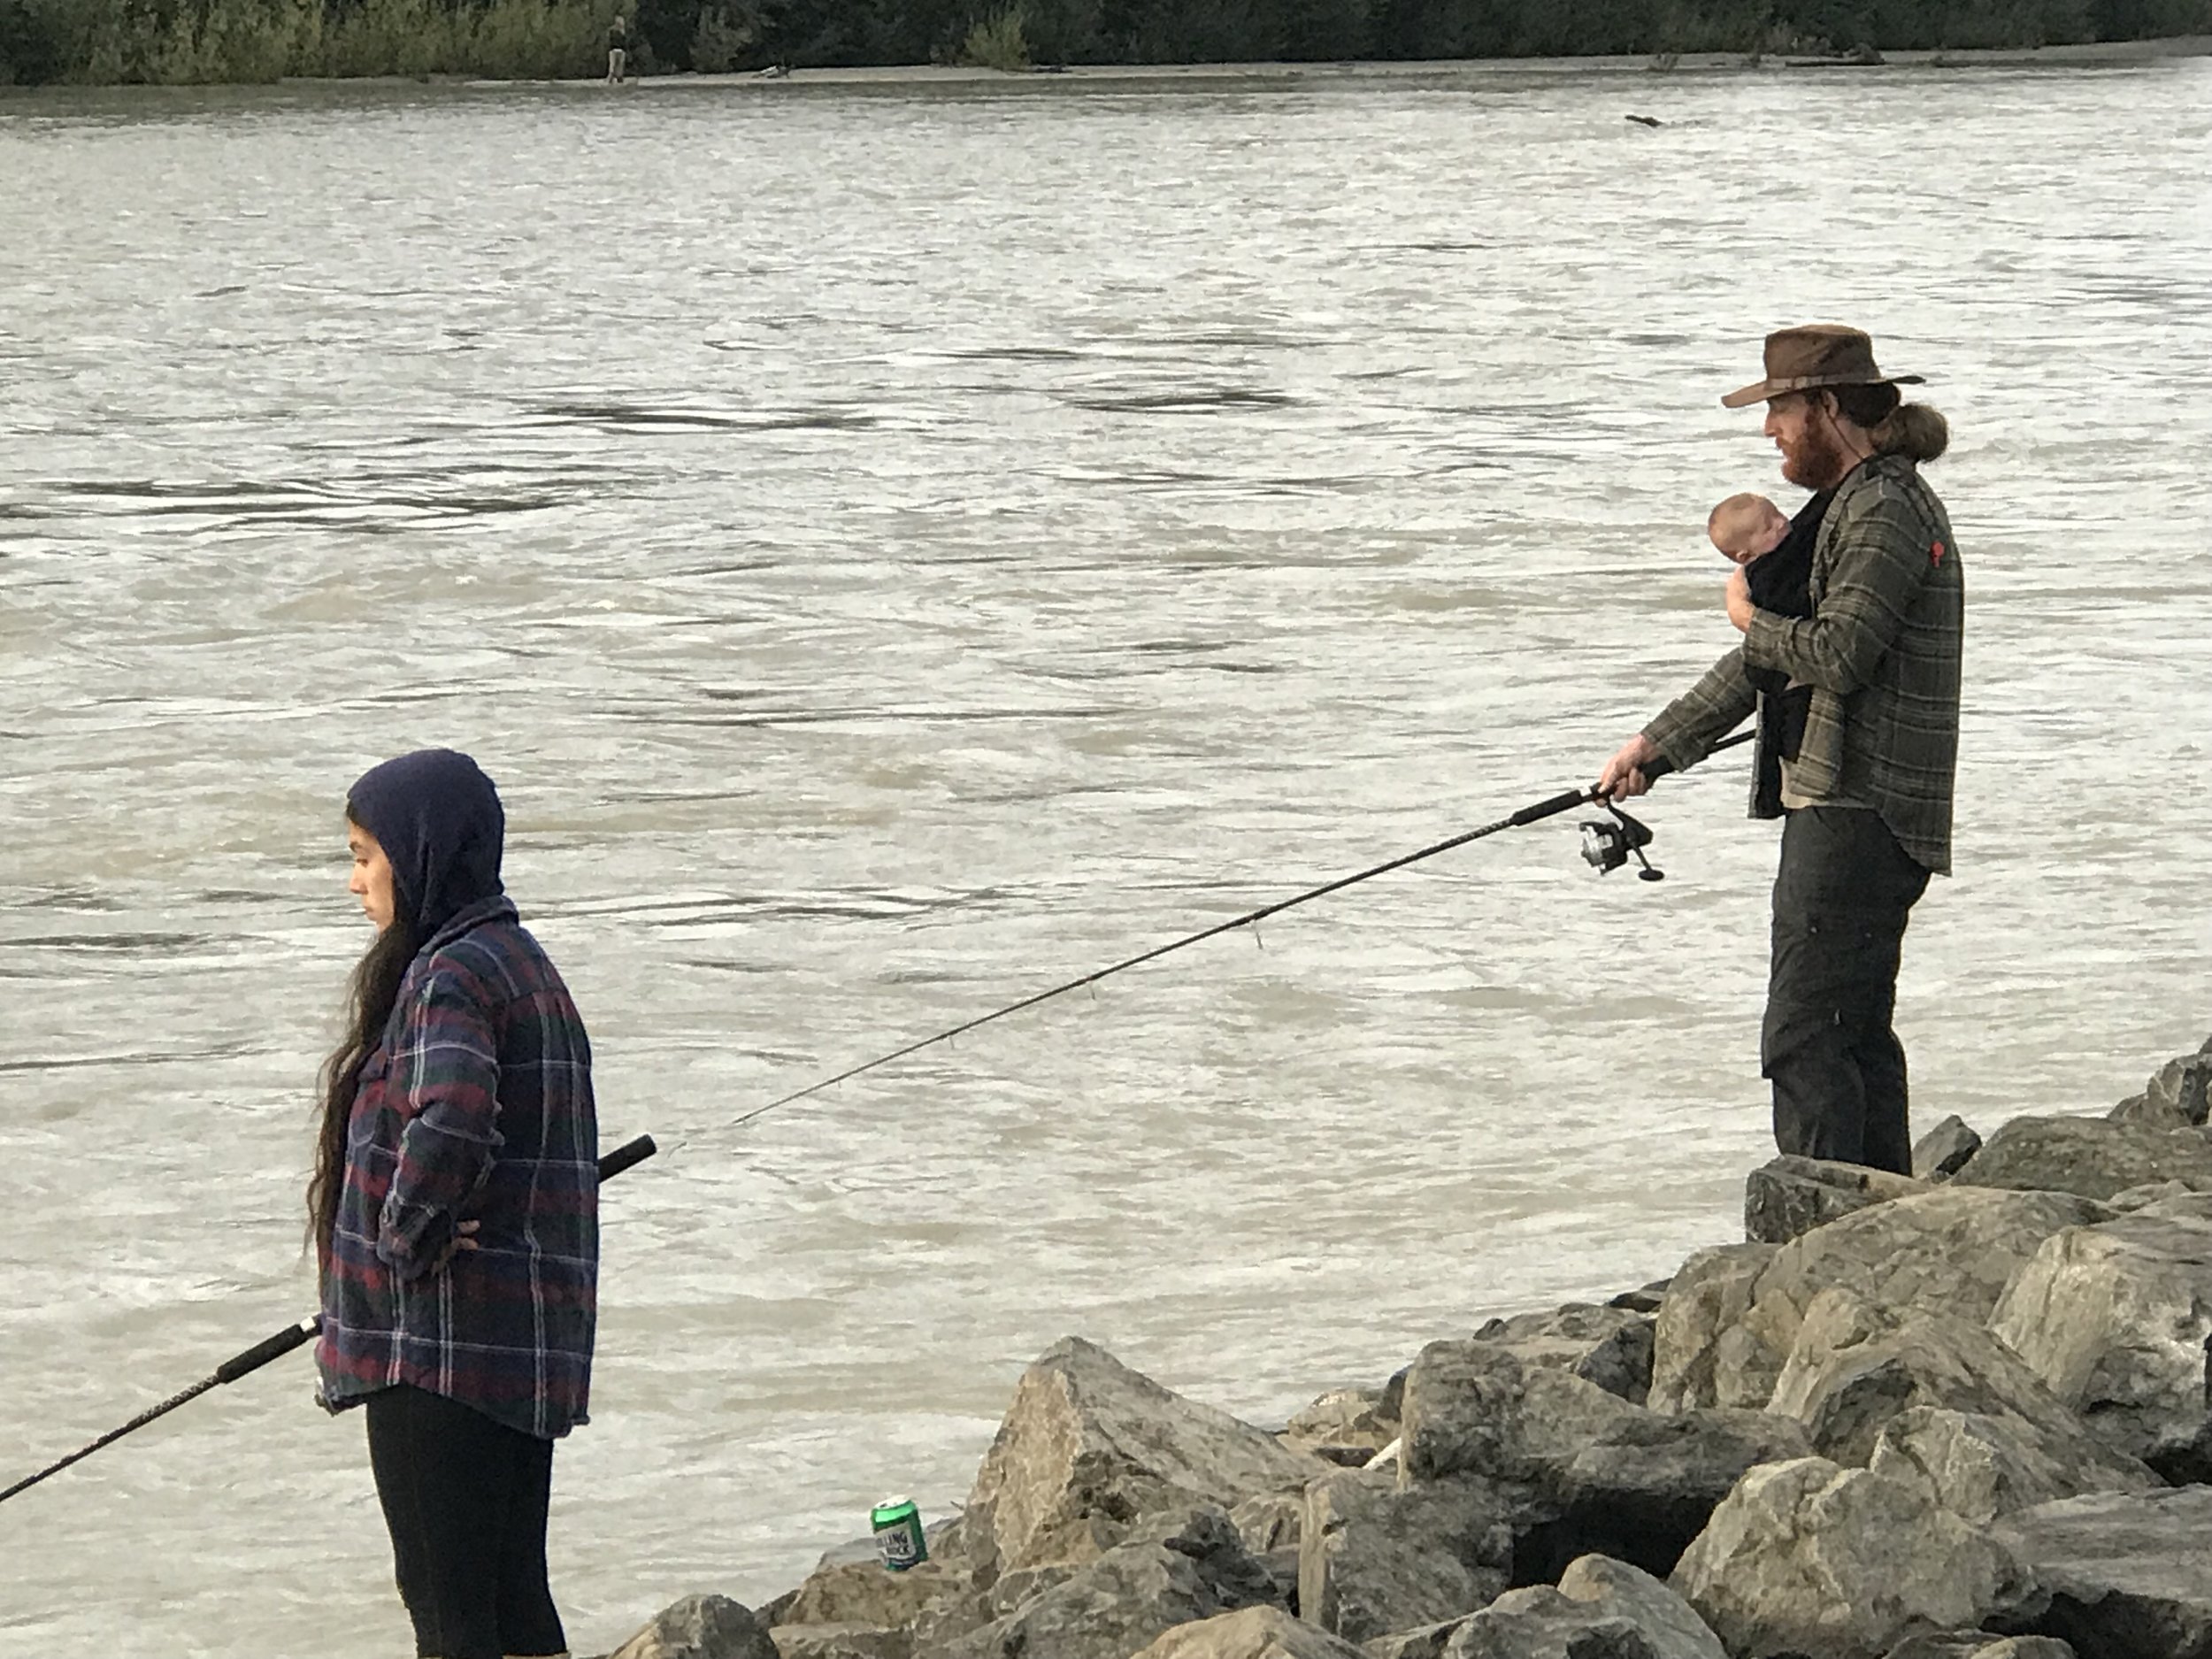  A family fishing outing on Alaska’s Susitna River. This is the time of year Alaskans fill their freezers with salmon for the long winter ahead.      